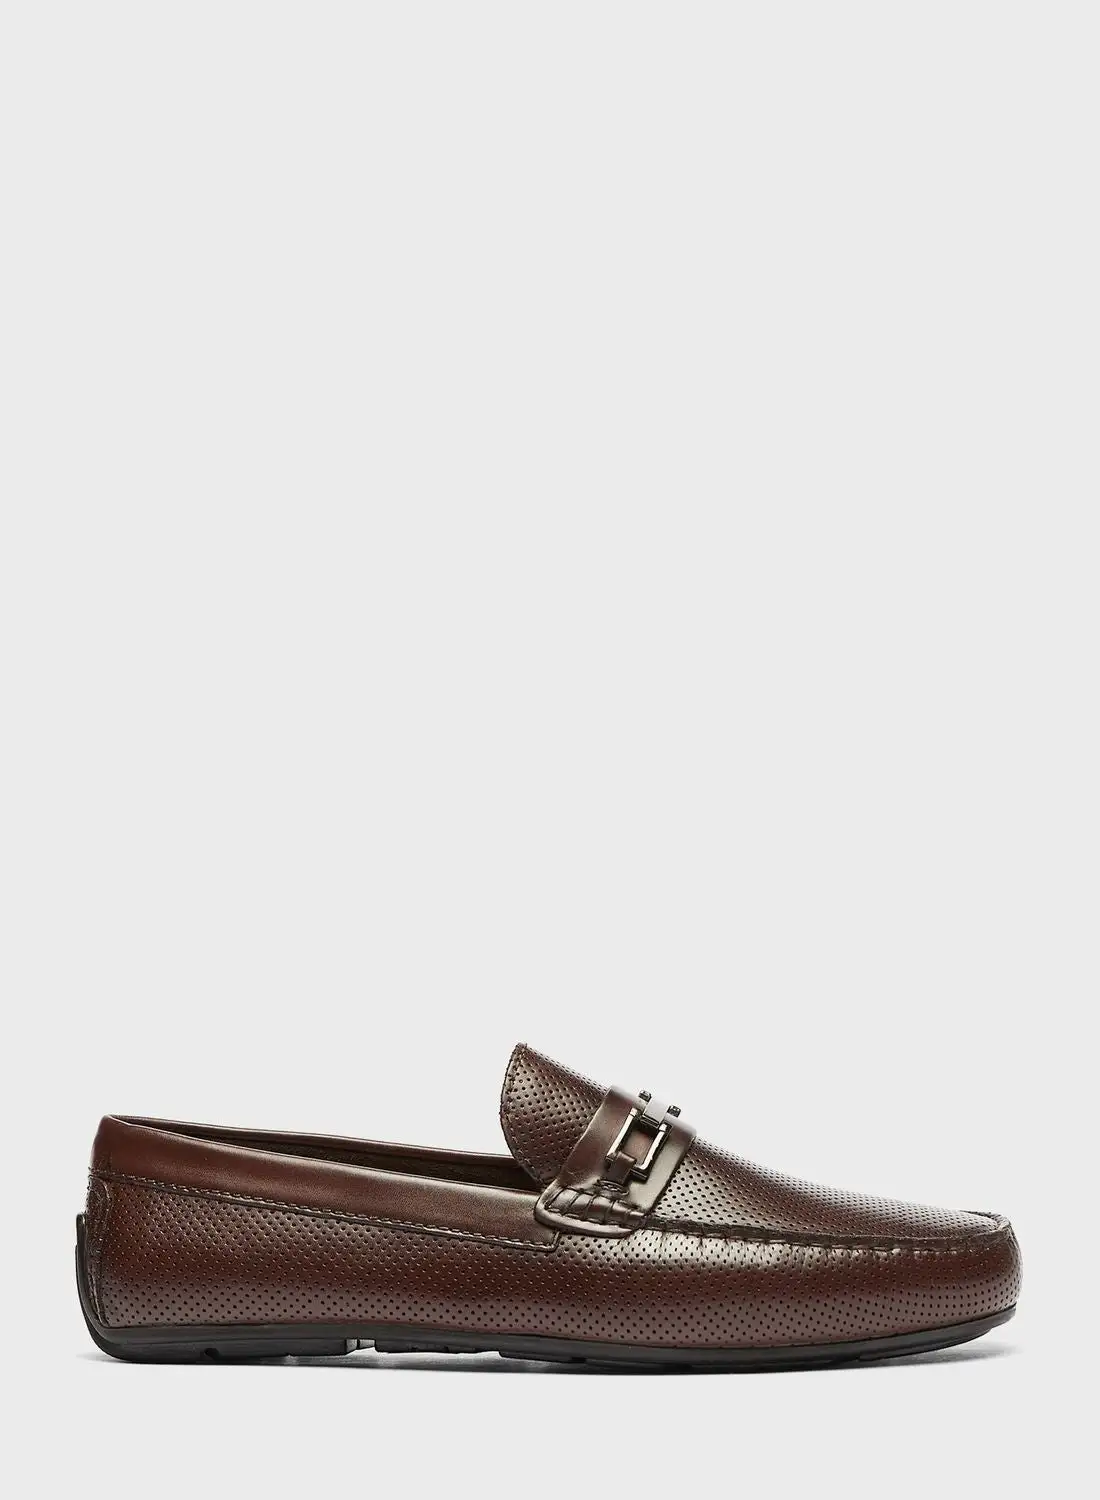 LBL by Shoexpress Casual Slip On Loafers